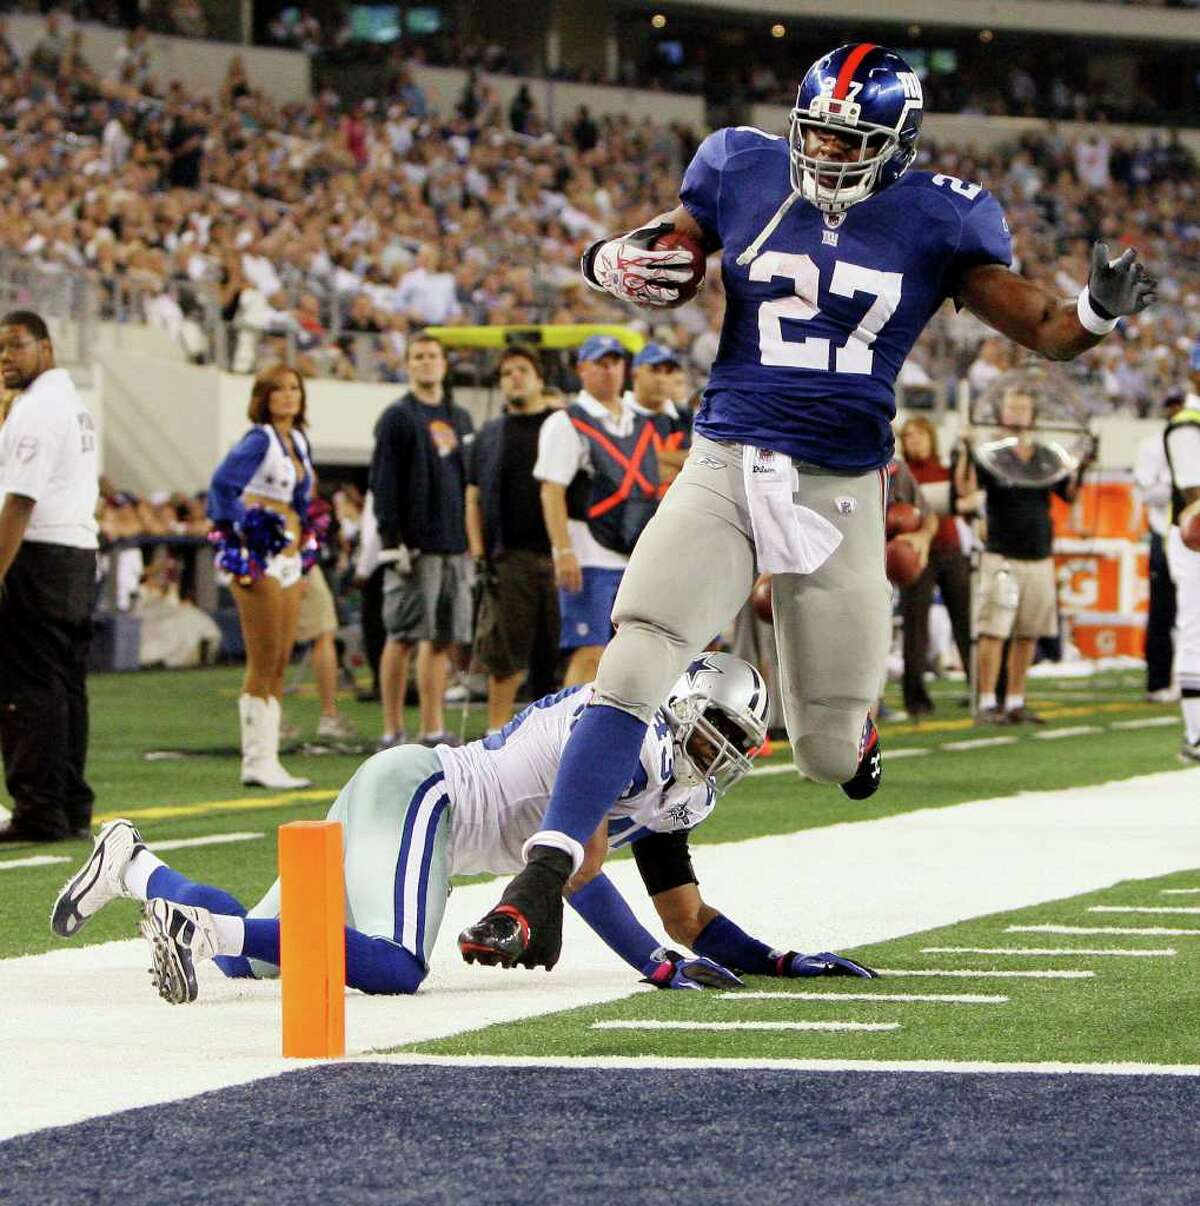 New York Giants running back Brandon Jacobs scores a touchdown as Dallas Cowboys safety Gerald Sensabaugh defends during the second half an NFL football game Monday, Oct. 25, 2010, in Arlington, Texas. New York won 41-35. (AP Photo/LM Otero)